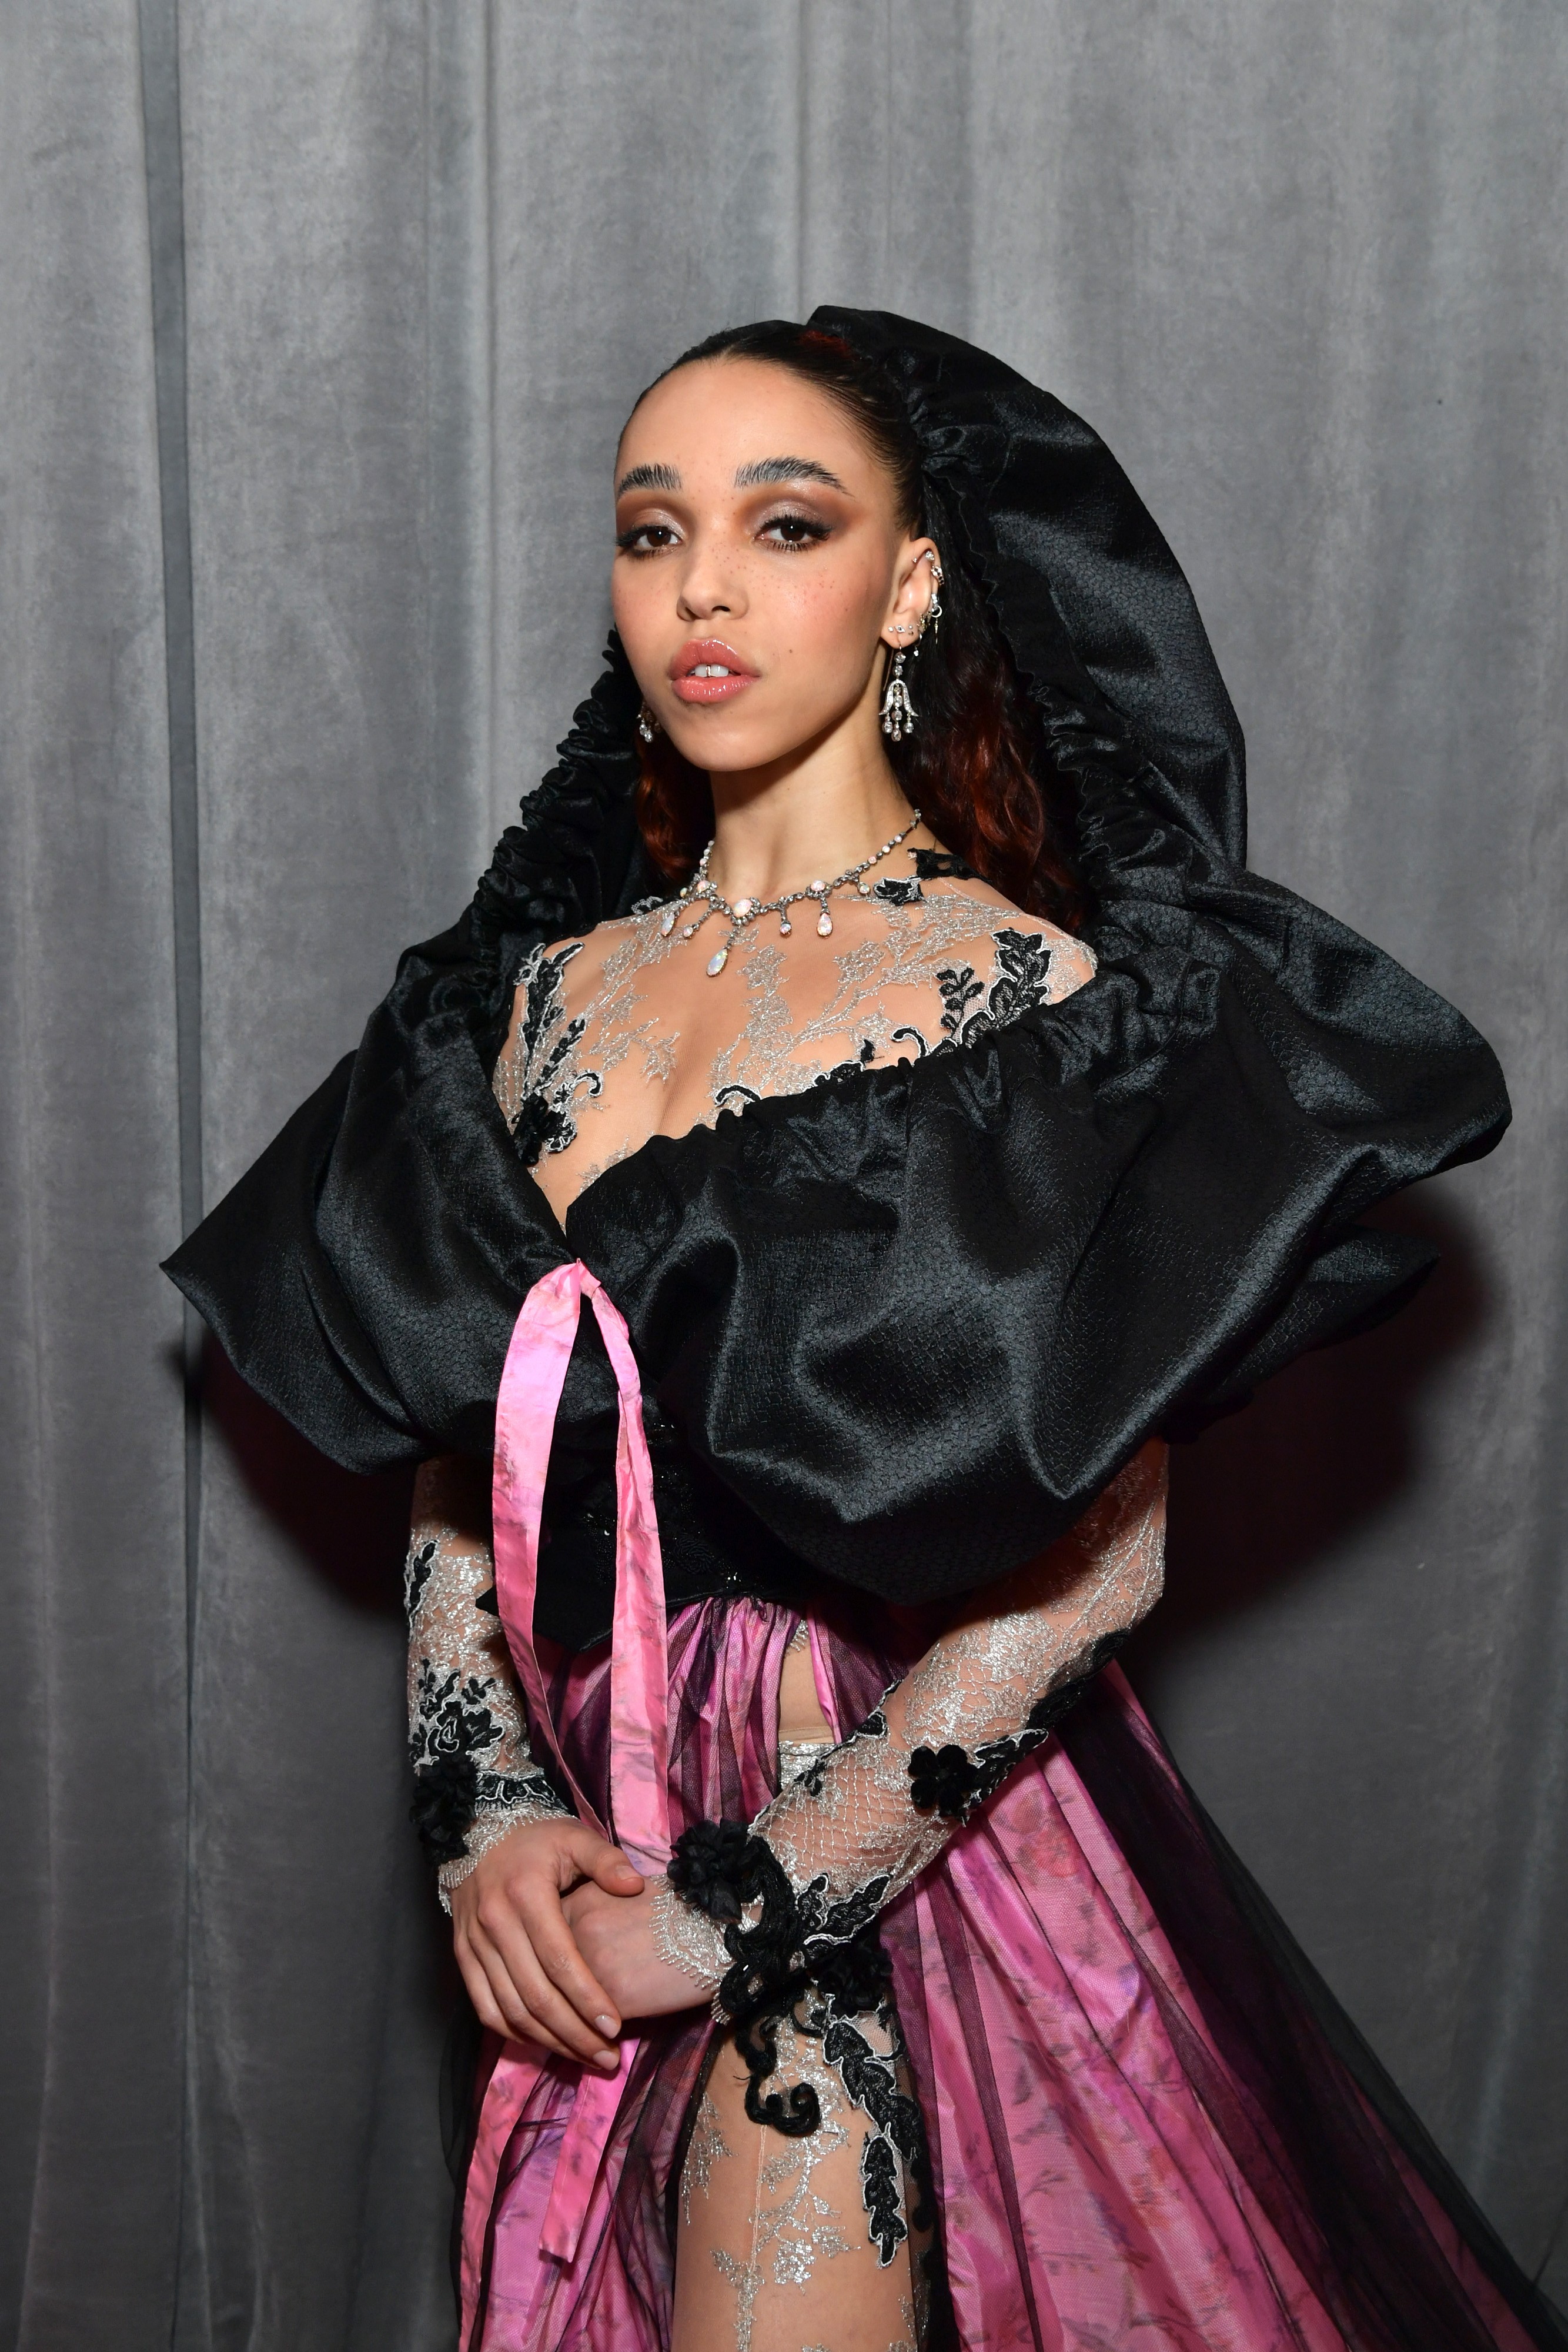 LOS ANGELES, CALIFORNIA - JANUARY 26: FKA twigs attends the 62nd Annual GRAMMY Awards at STAPLES Center on January 26, 2020 in Los Angeles, California. (Photo by Emma McIntyre/Getty Images for The Recording Academy) (Foto: Getty Images for The Recording A)